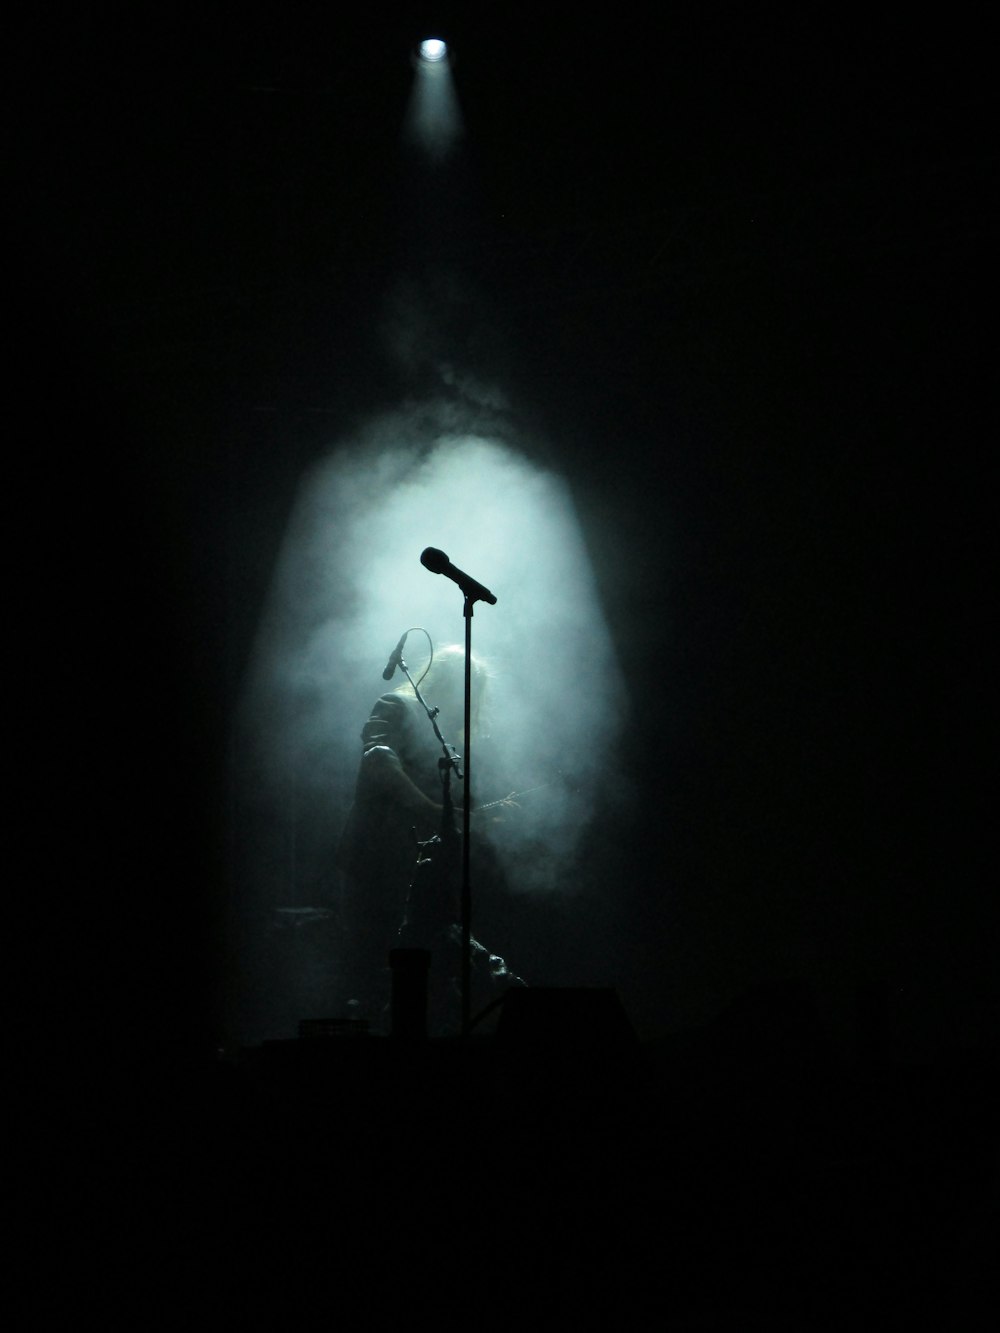 a person standing in front of a microphone on a stage